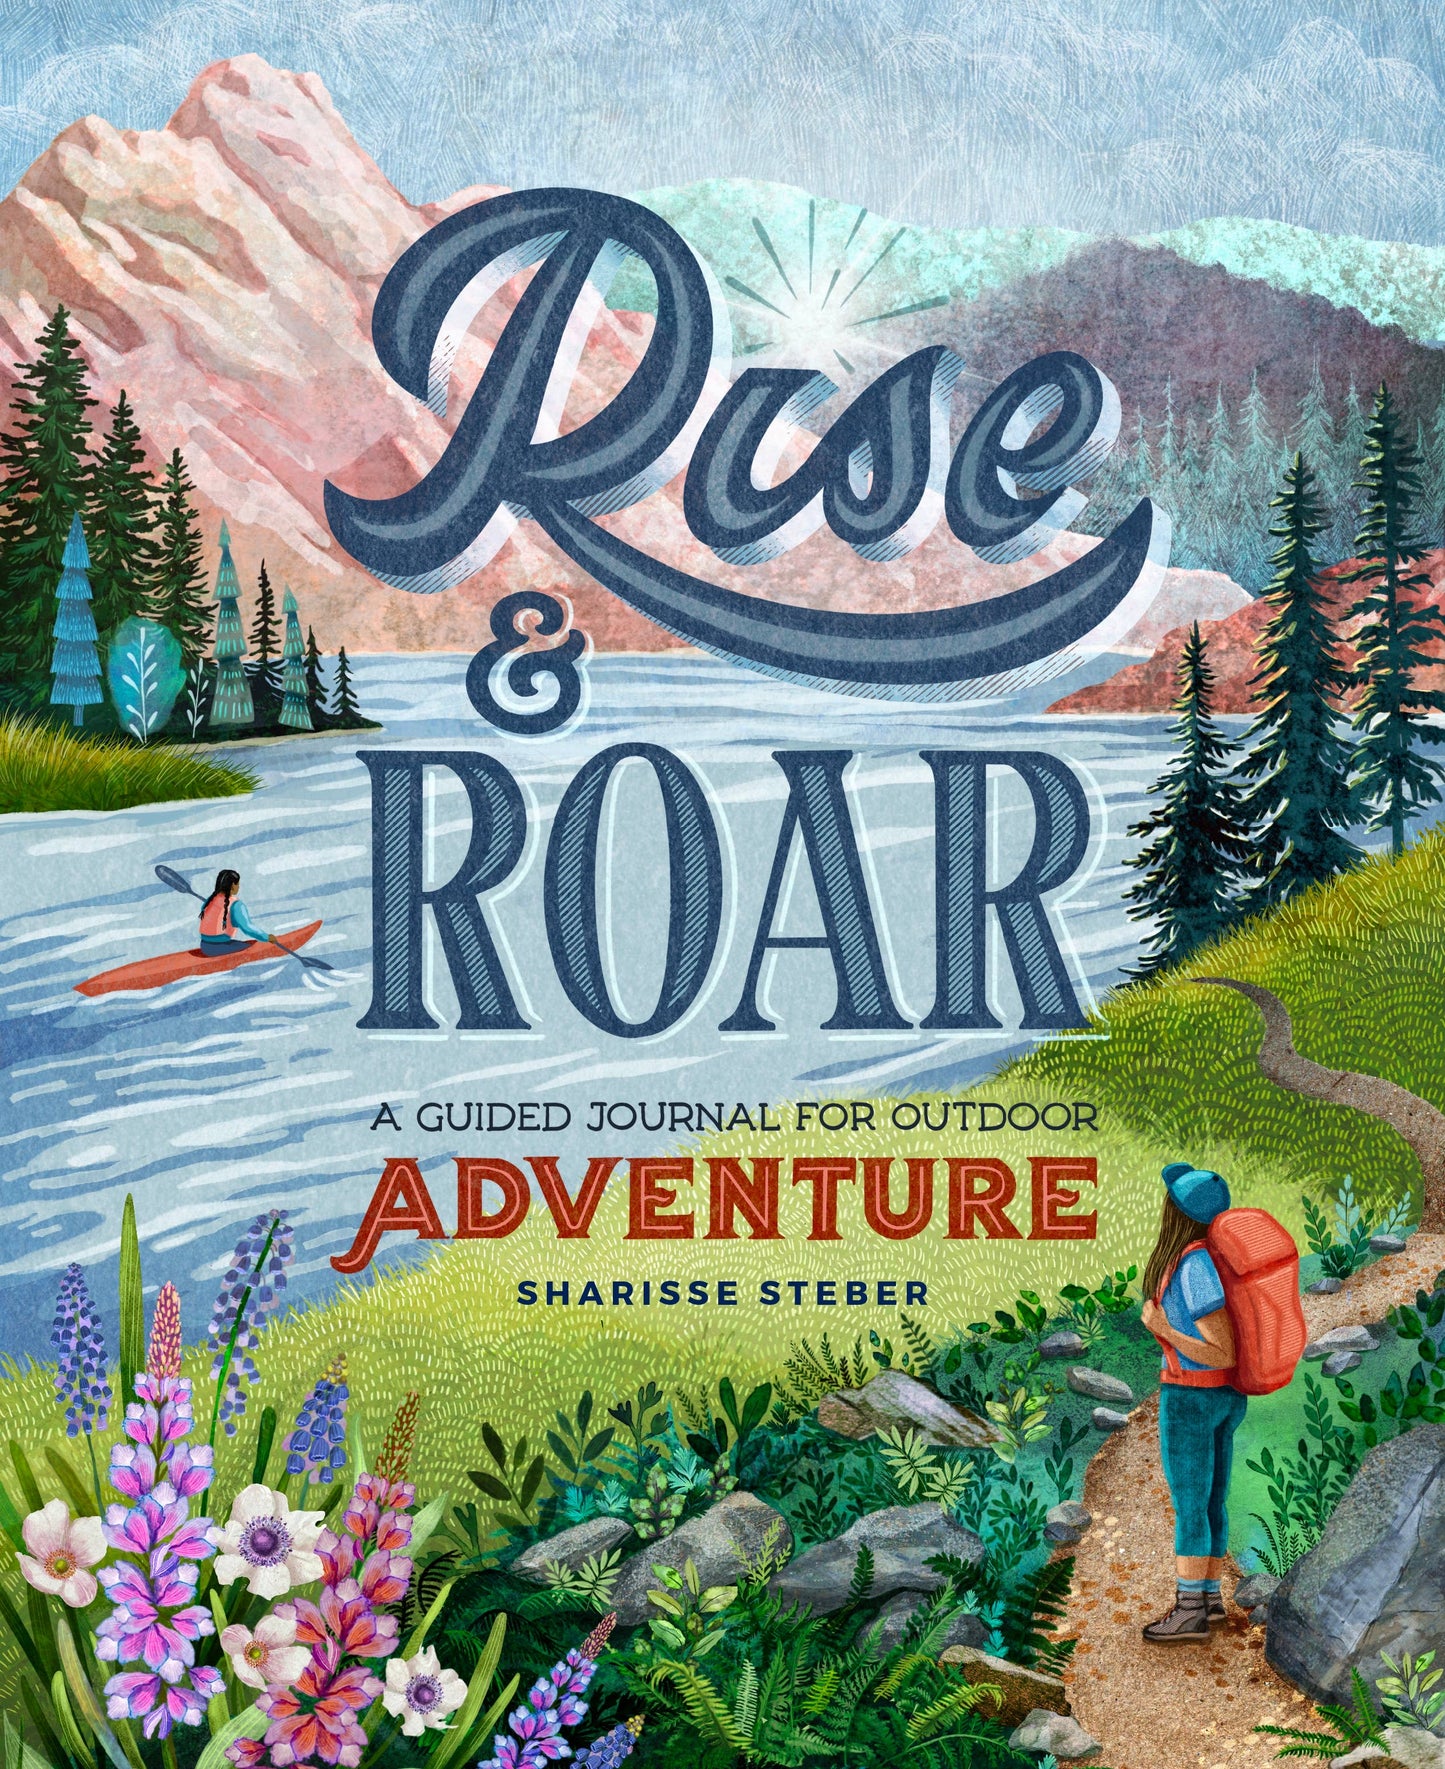 Rise and Roar: A Guided Journey for Outdoor Adventure